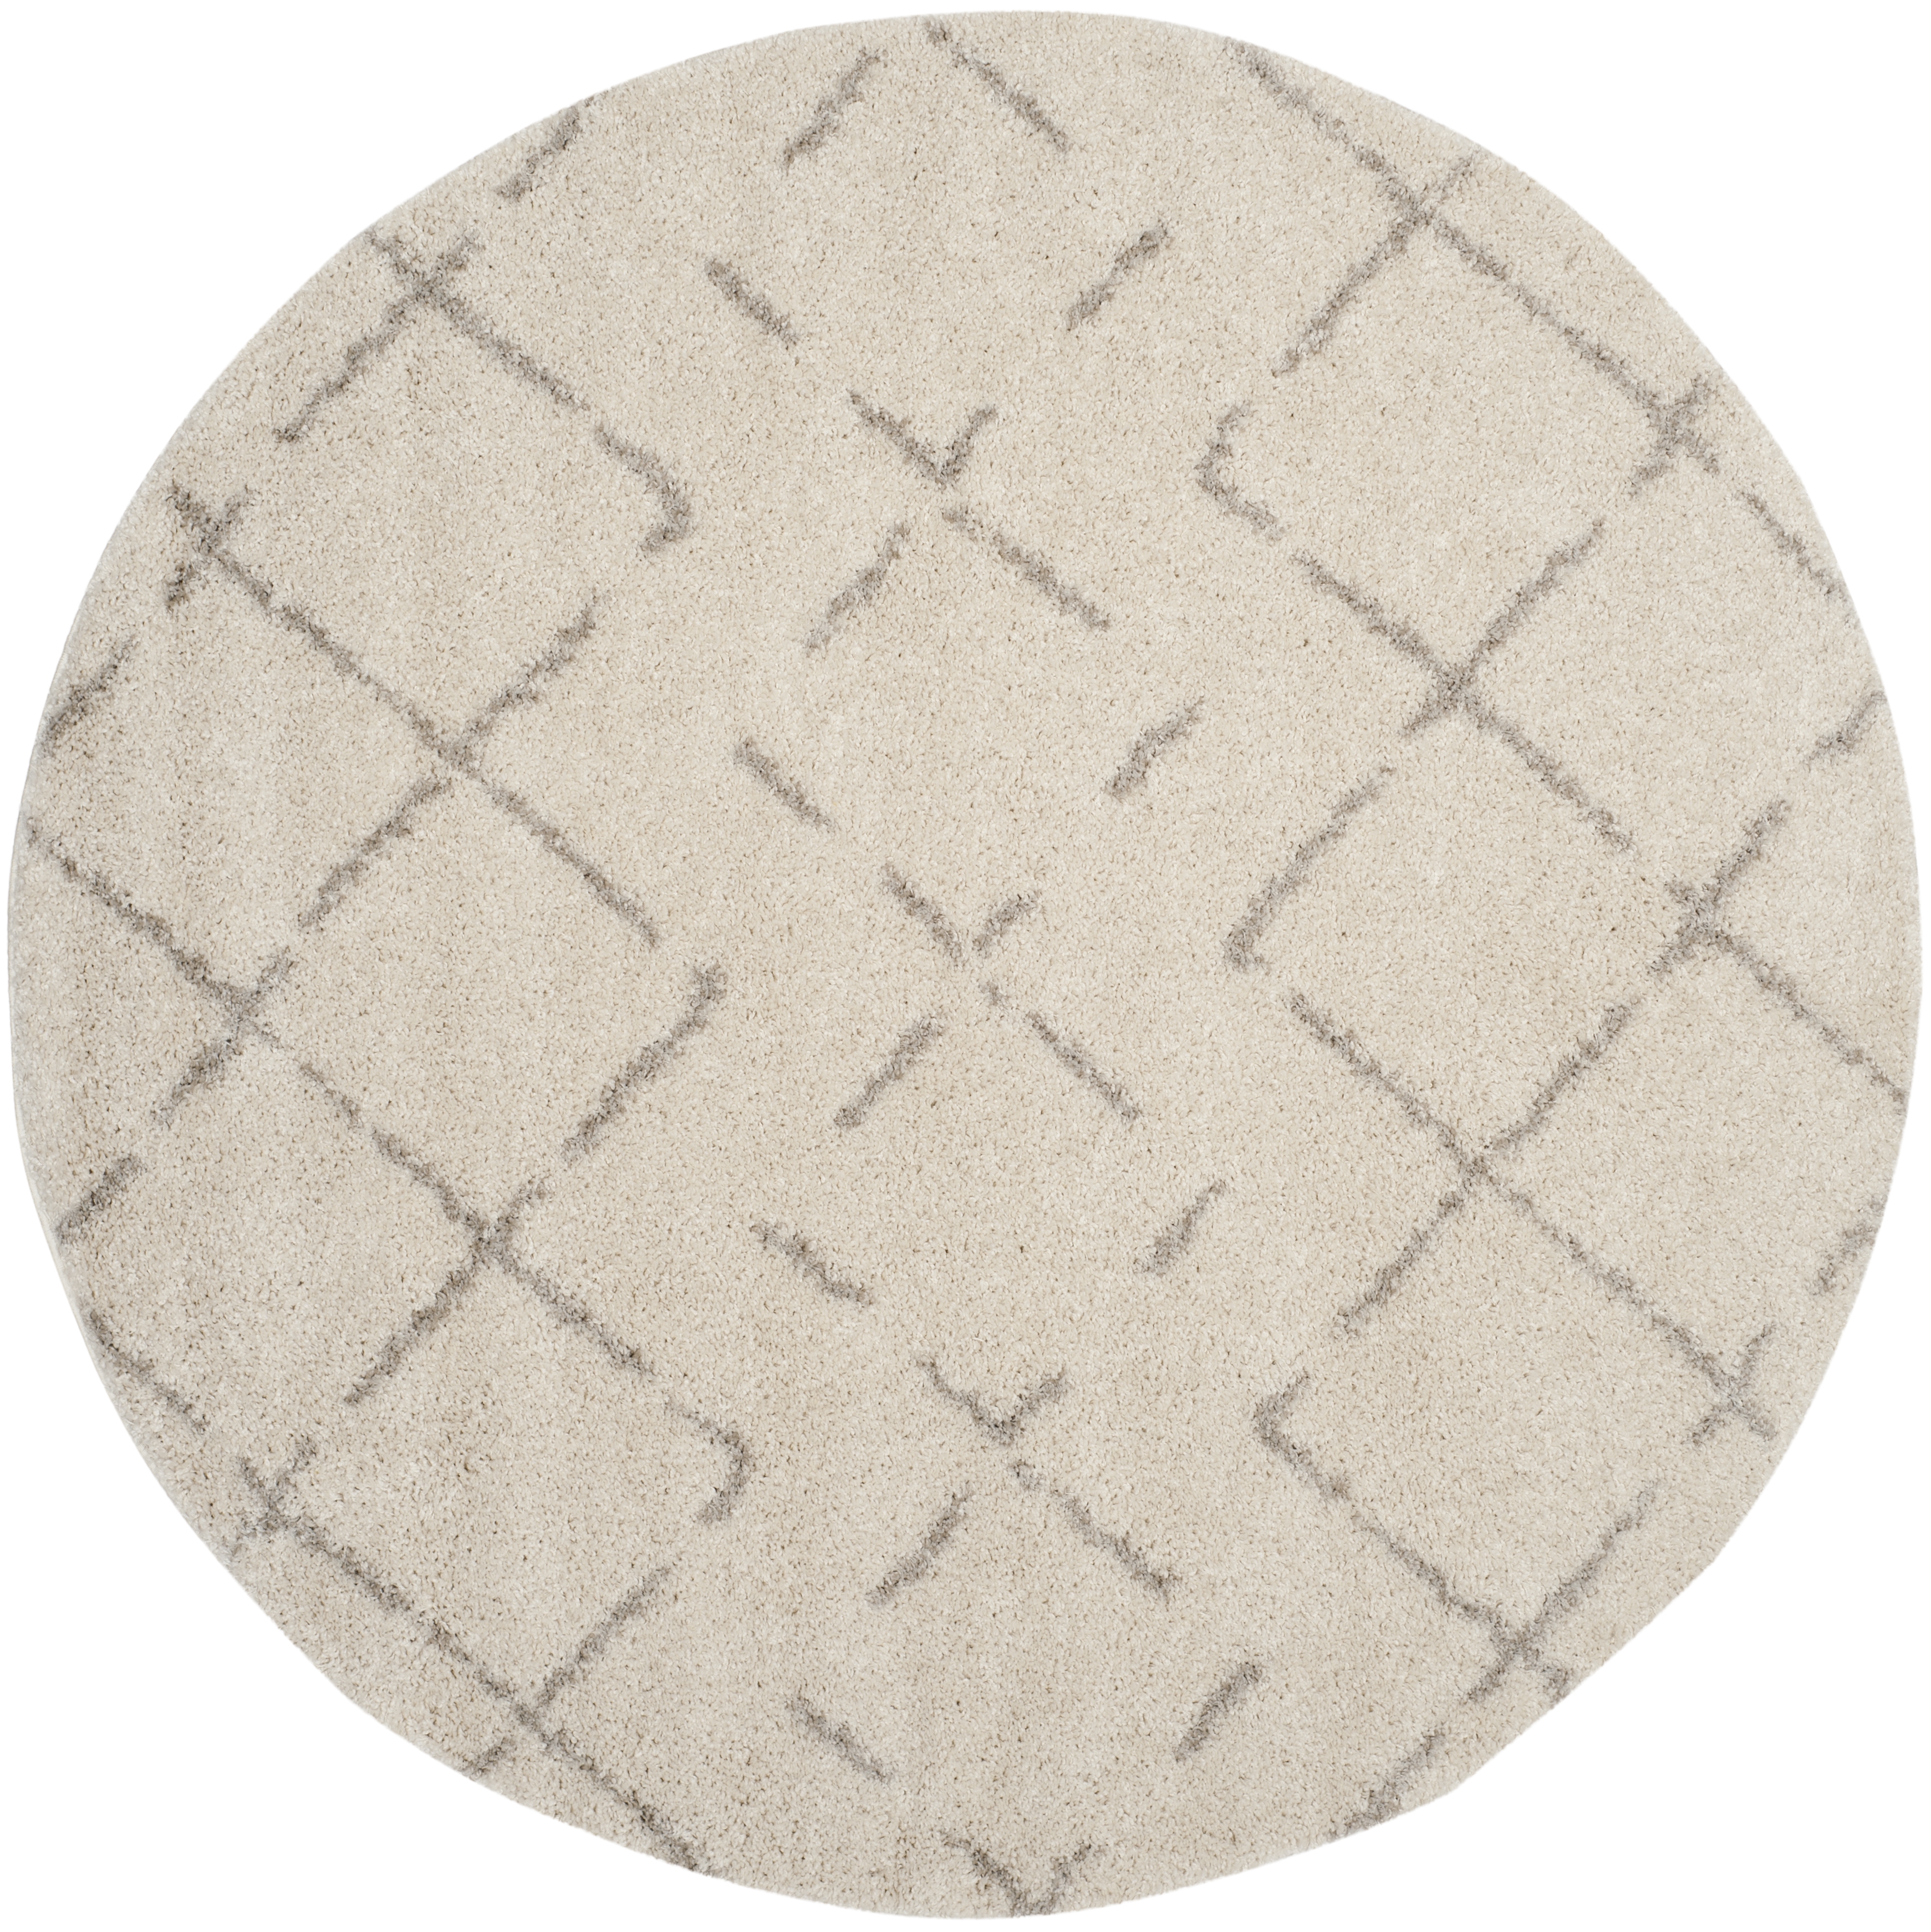 Arlo Home Woven Area Rug, ASG743A, Ivory/Beige,  6' 7" X 6' 7" Round - Image 0